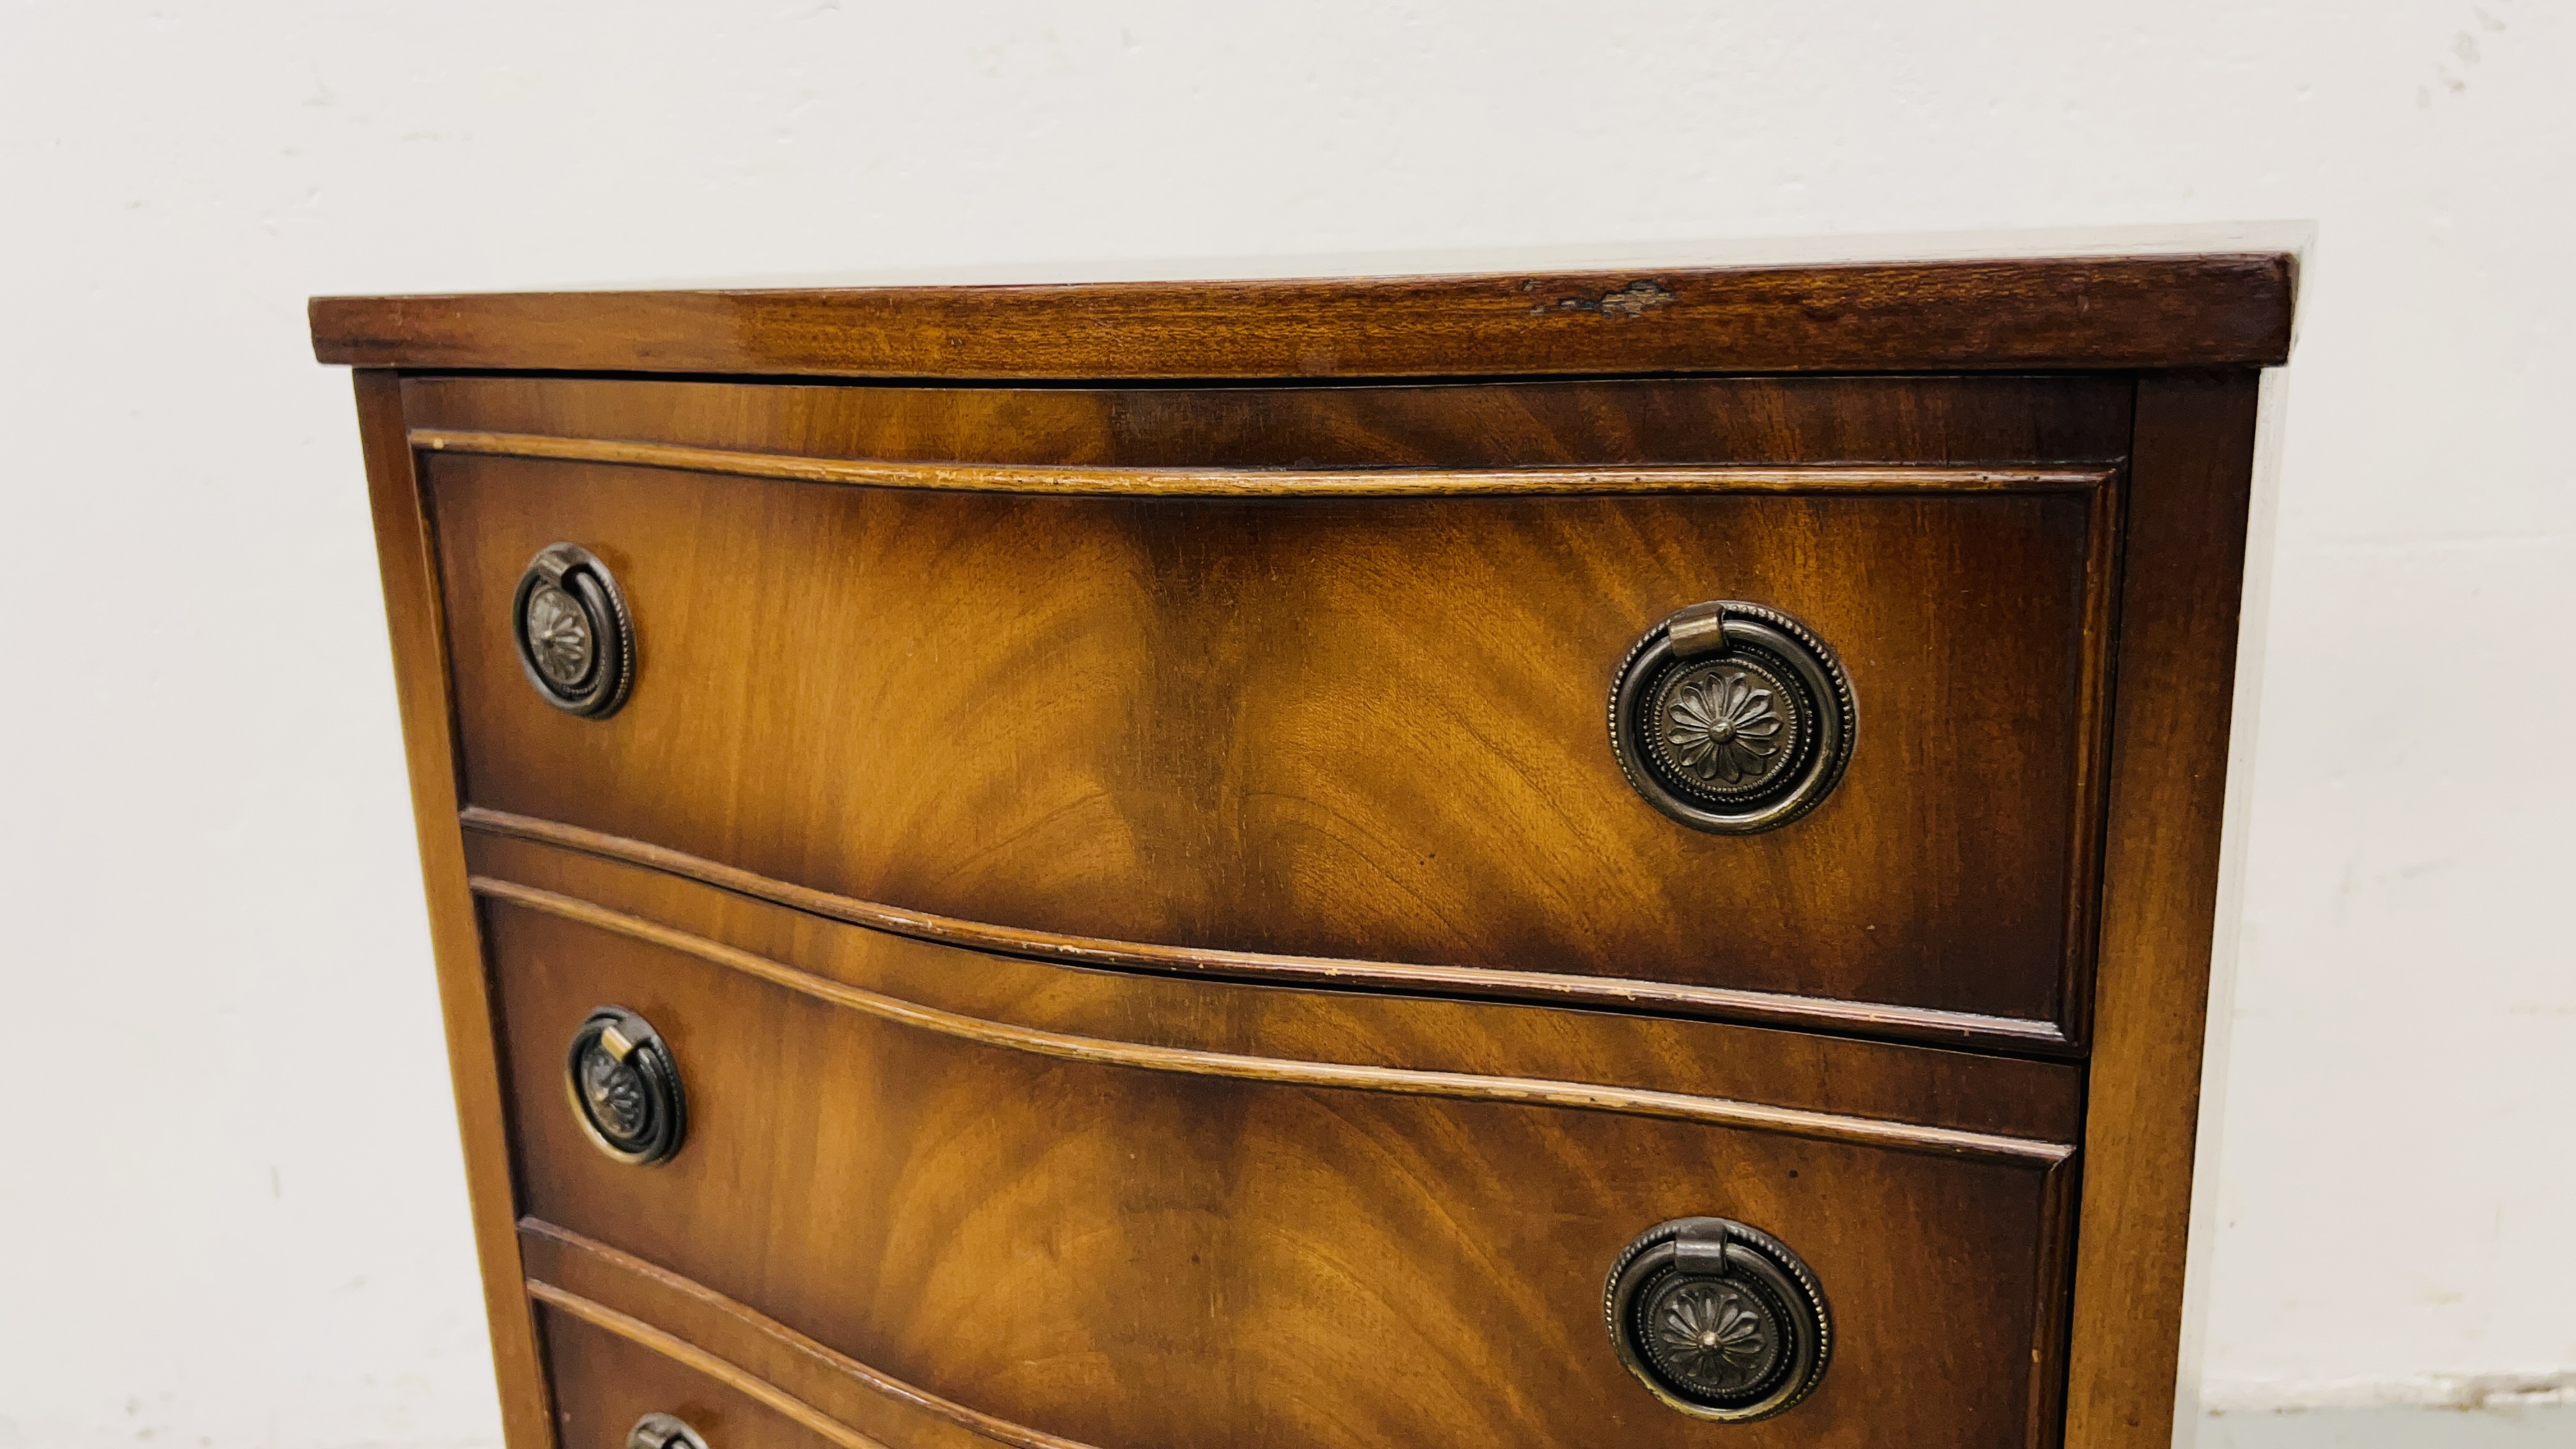 REPRODUCTION FLAME MAHOGANY FINISH FOUR DRAWER CHEST WIDTH 48CM. DEPTH 37CM. HEIGHT 69CM. - Image 2 of 6